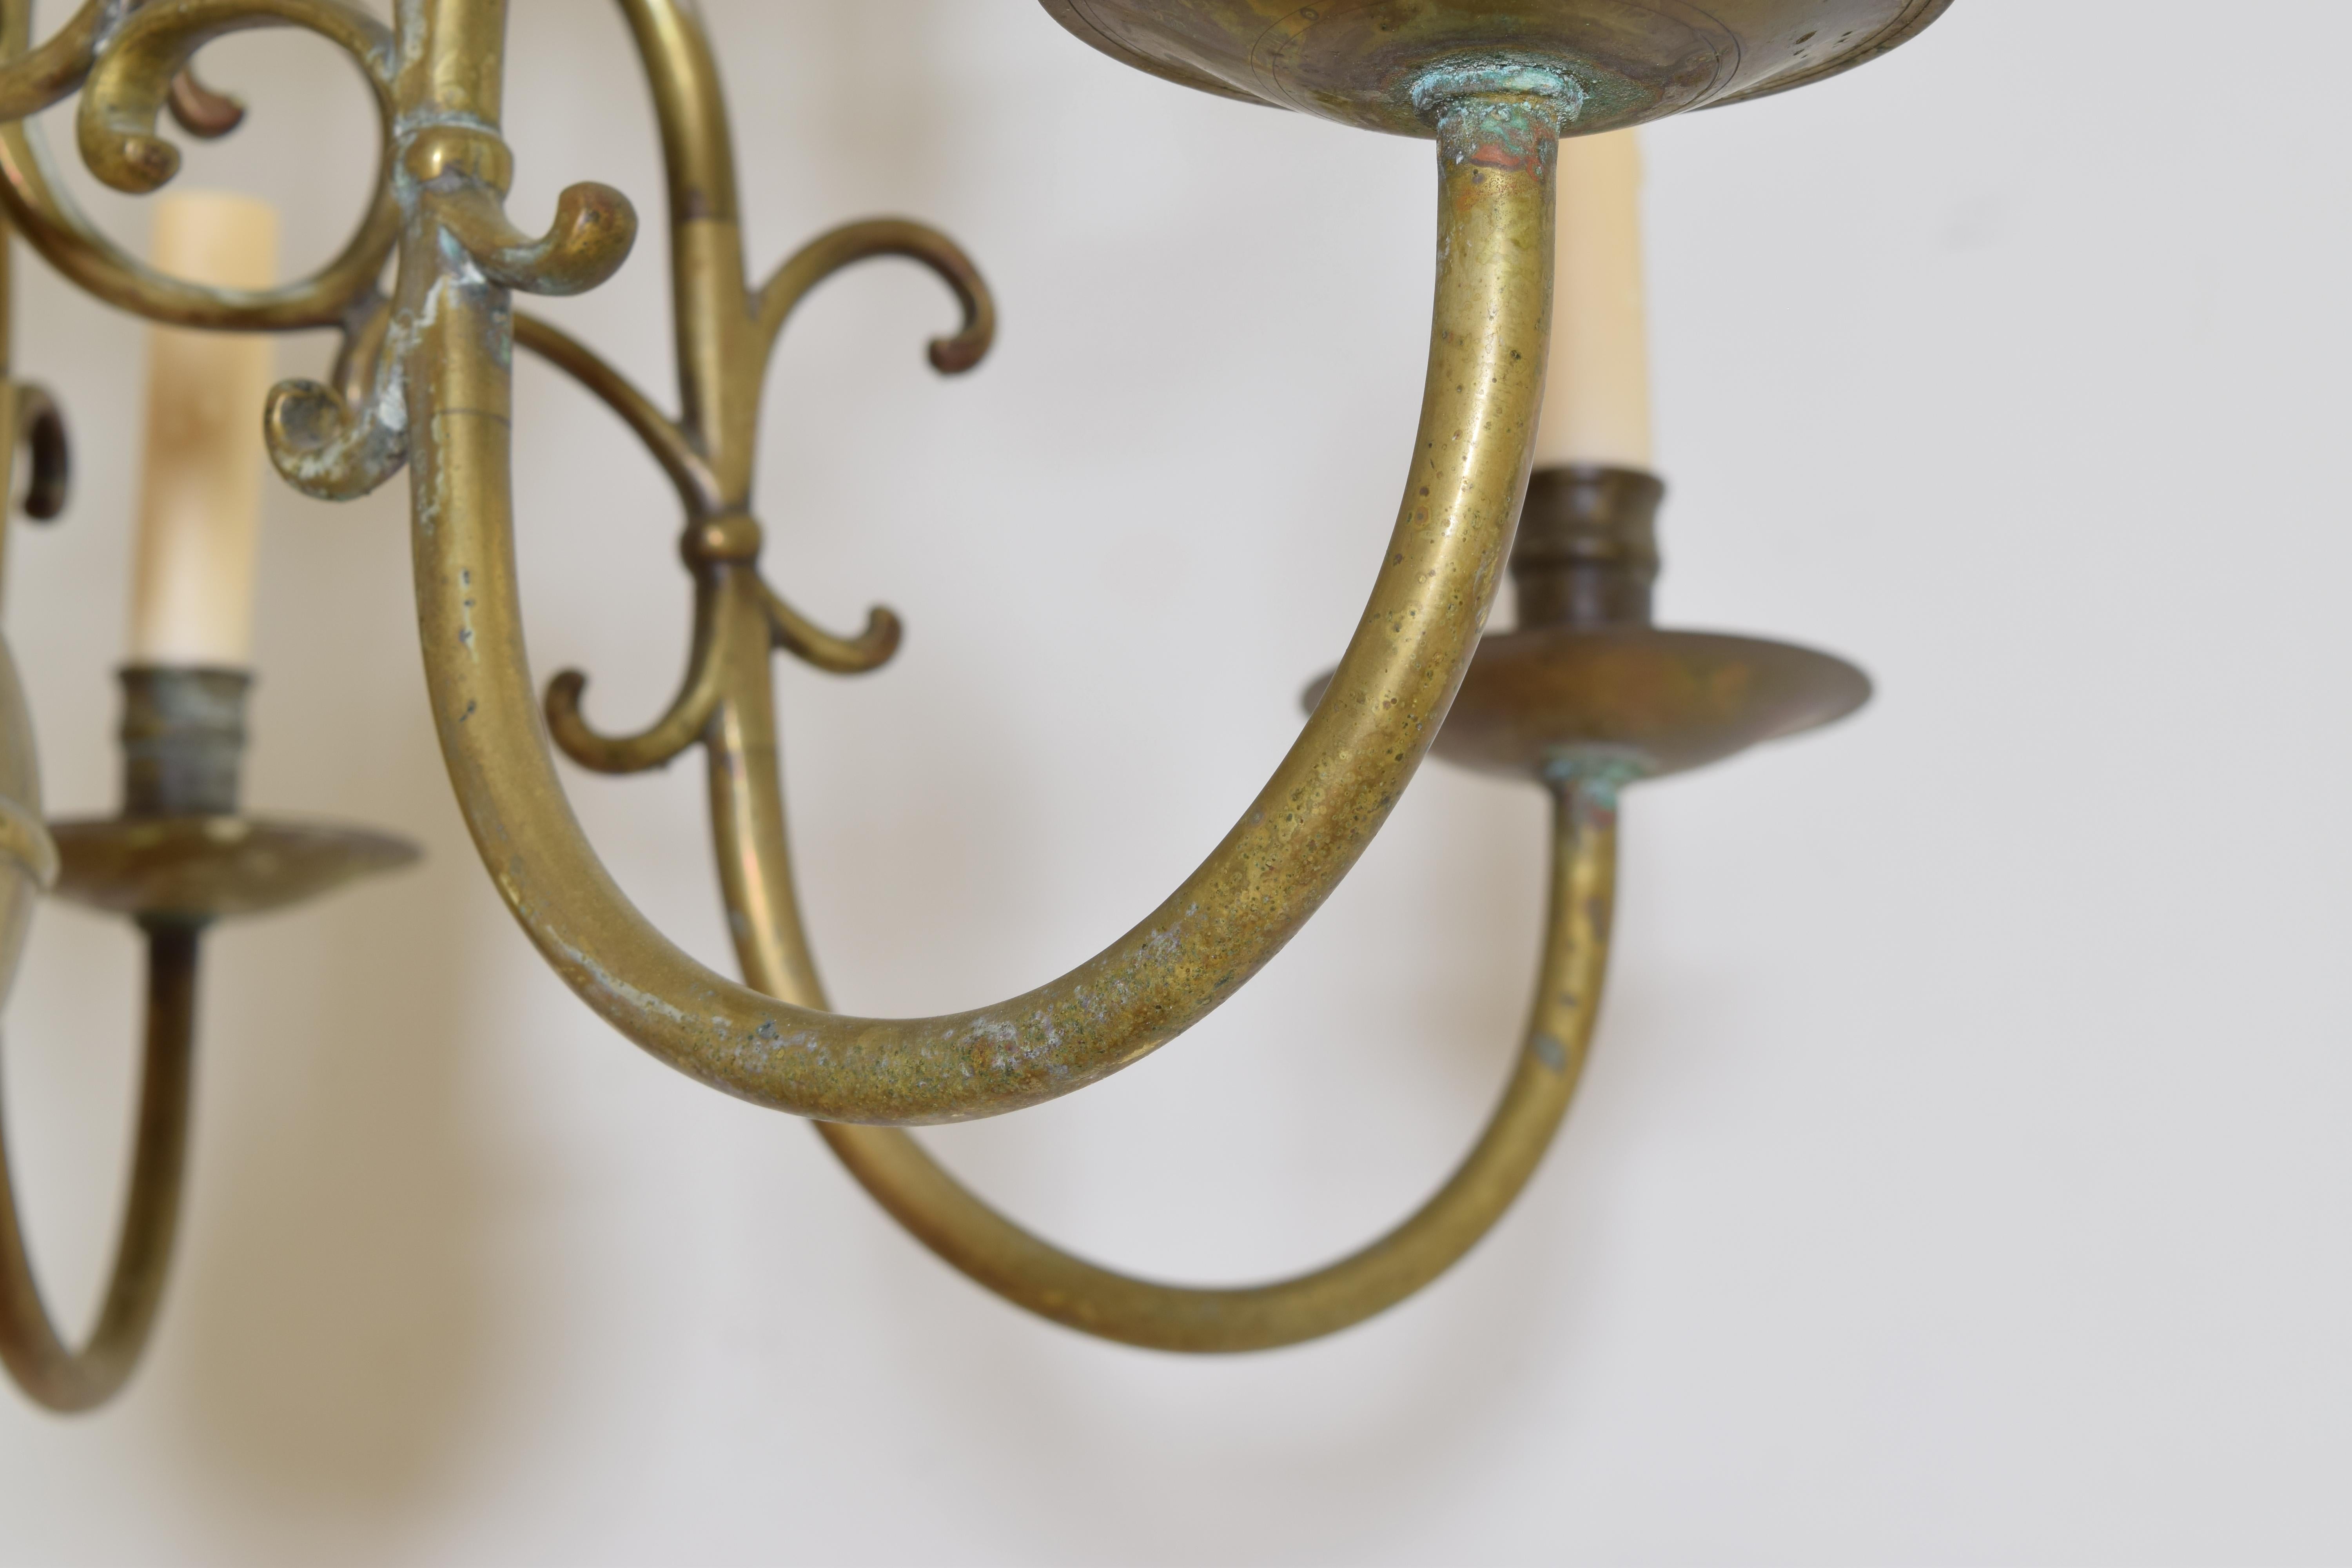 Dutch or French Patinated Brass 2-Tier 12-Light Chandelier, 2nd half 19th cen. For Sale 2